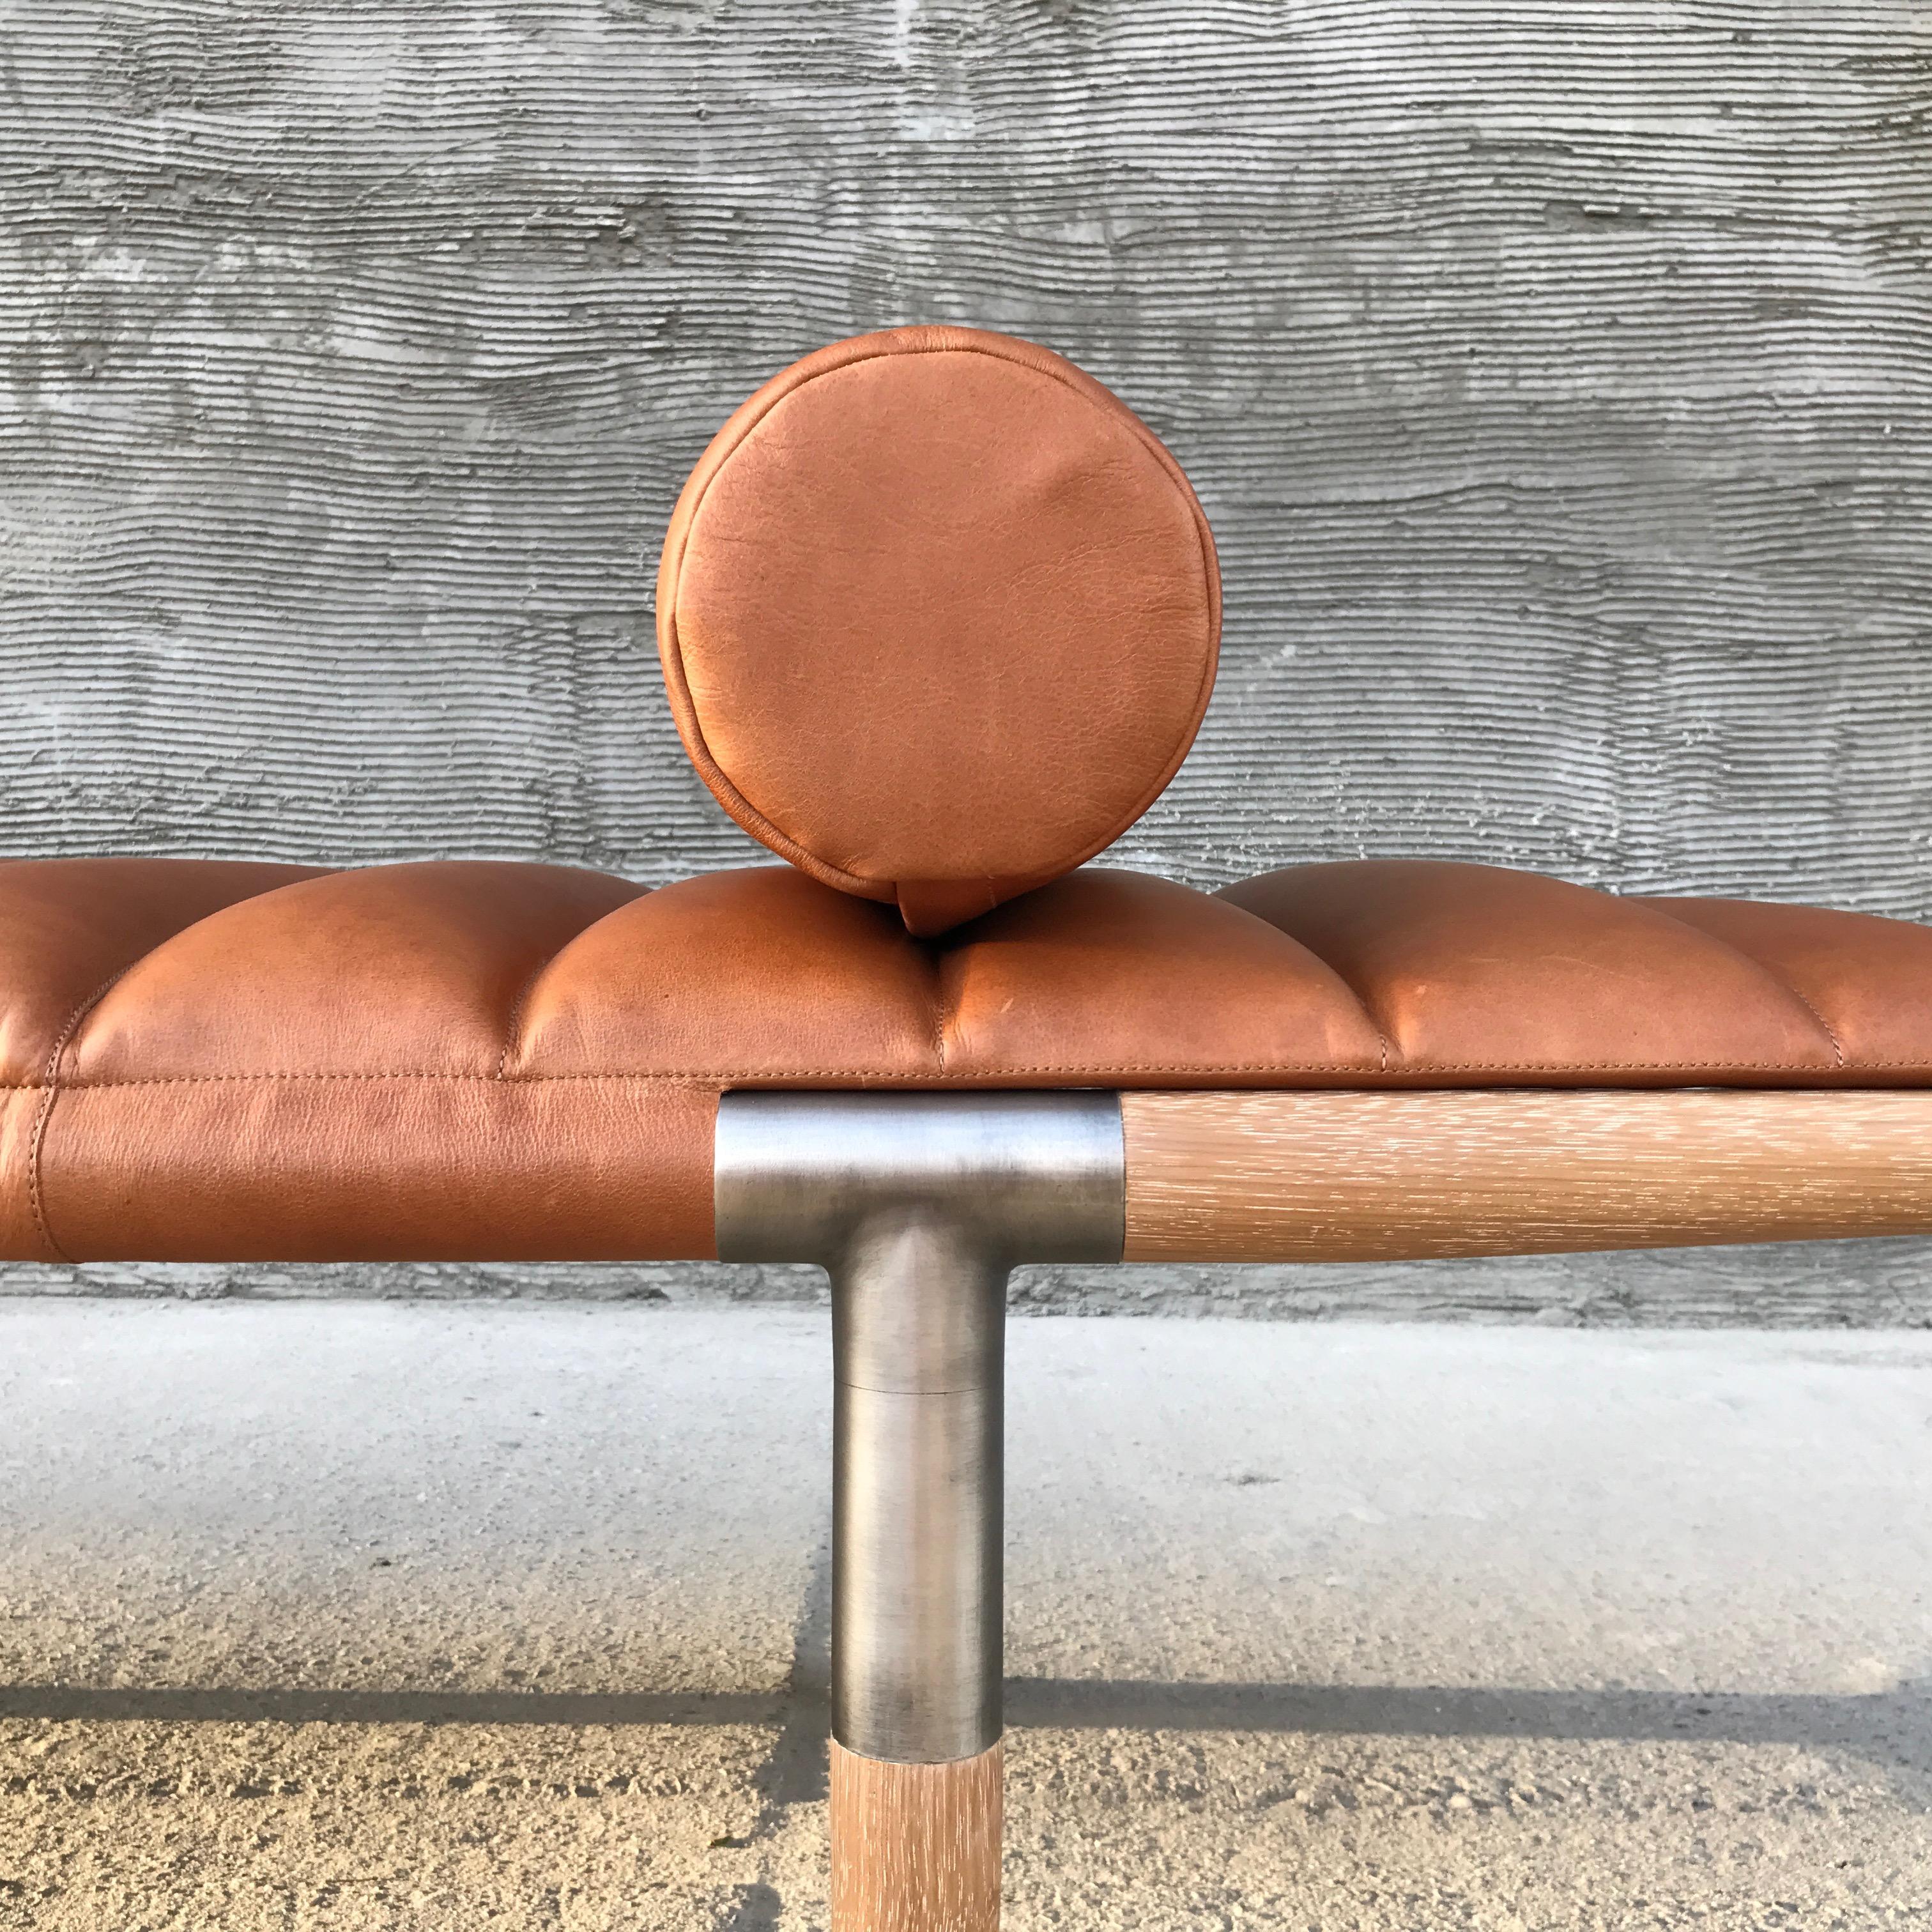 The EÆ daybed in Cognac leather with Cerused Iroko legs & burnished nickel frame.
“I wanted to create something better than Mies van der Rohe,” says designer Ben Erickson of Erickson Aesthetics about his EAE daybed, which bears a striking